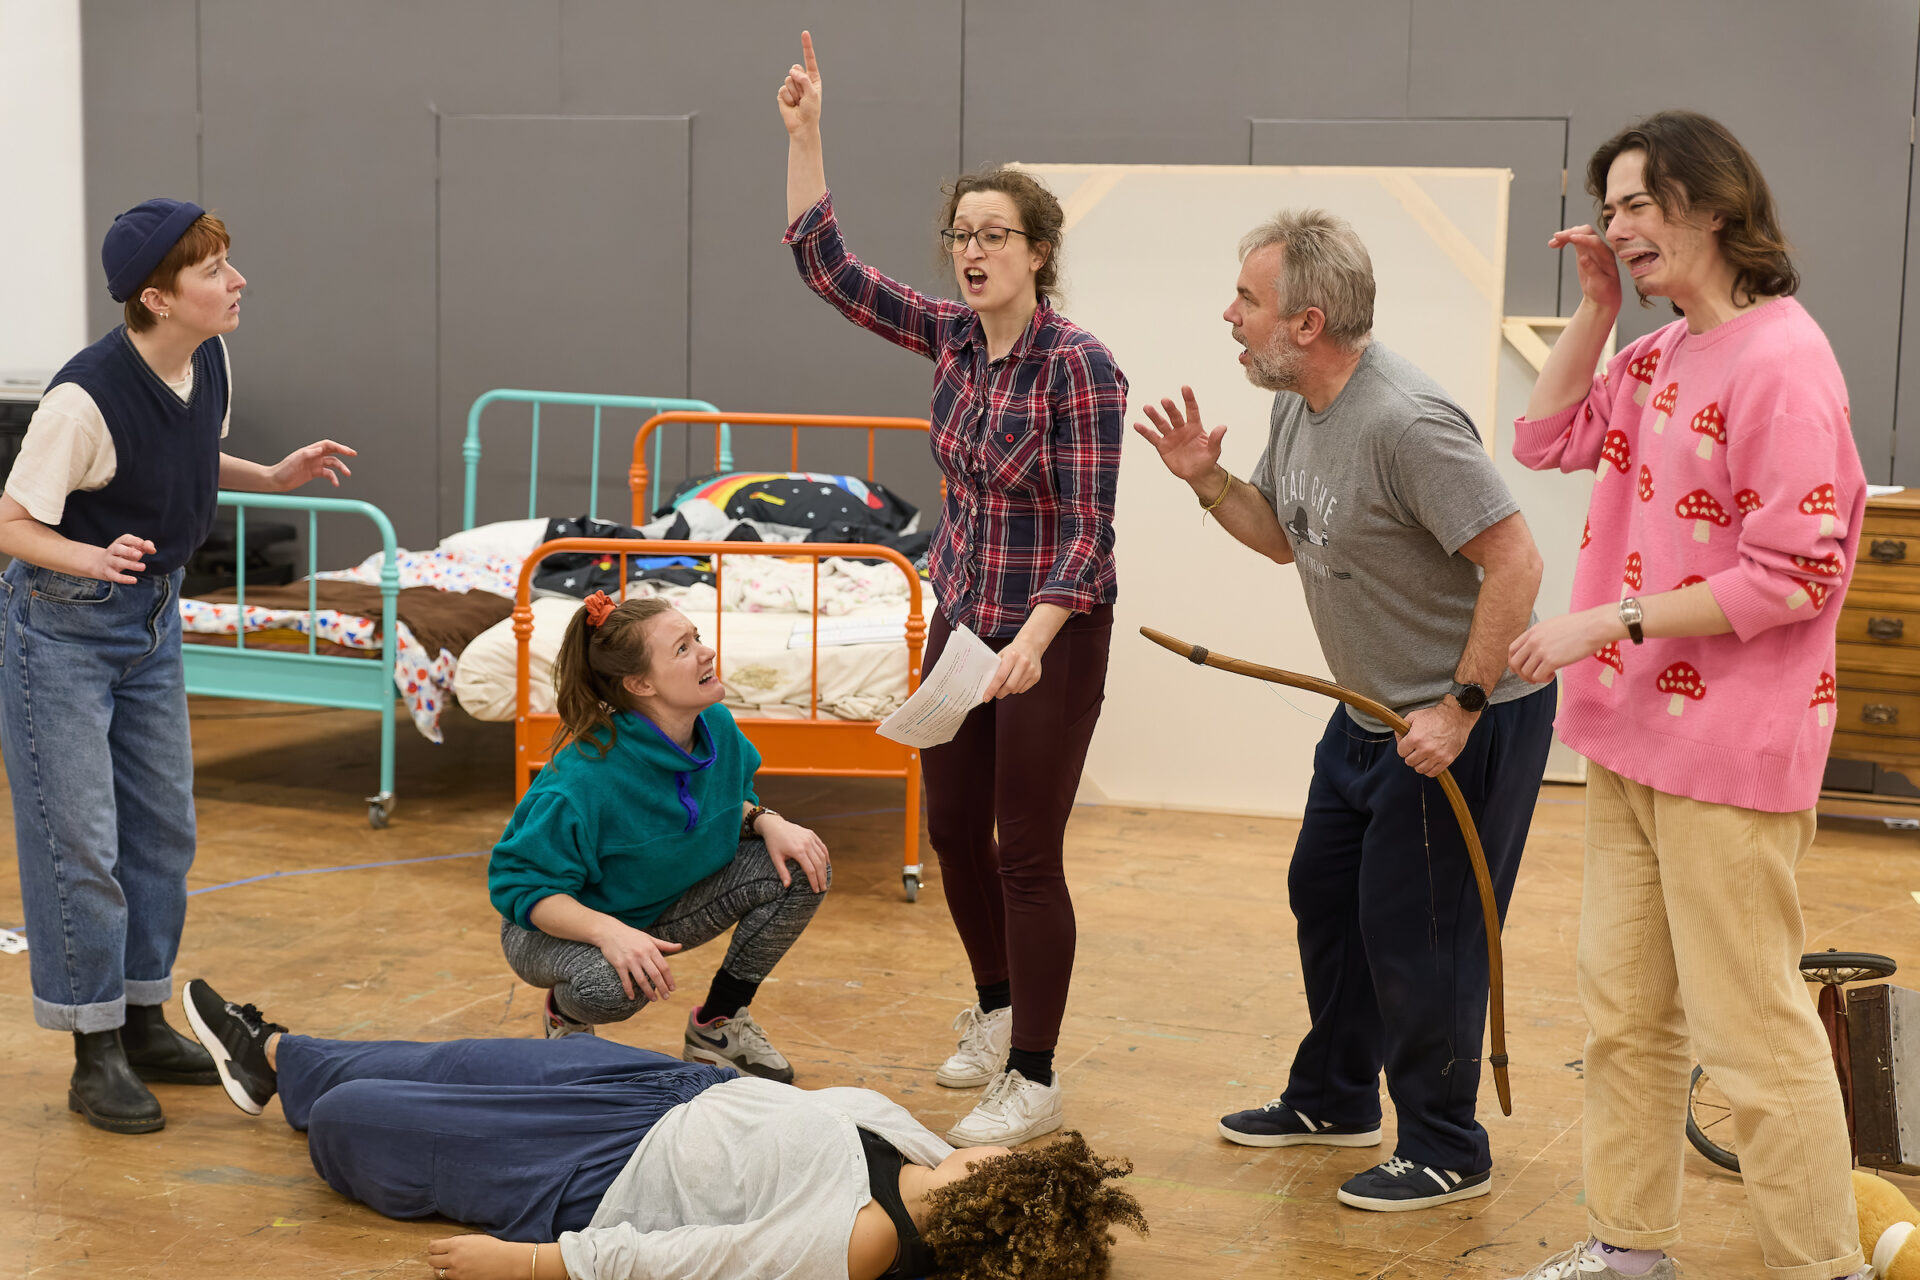 Rebecca Hayes (Peter), Rebecca Killick (Tiger / Nana / Slightly), Emily Burnett (Wendy), Lynwen Haf Roberts (Nibs), Keiron Self (Mr Darling / Smee / Tootles) and Edward Lee (Apprentice Actor) in Peter Pan rehearsals (c) Mark Douet